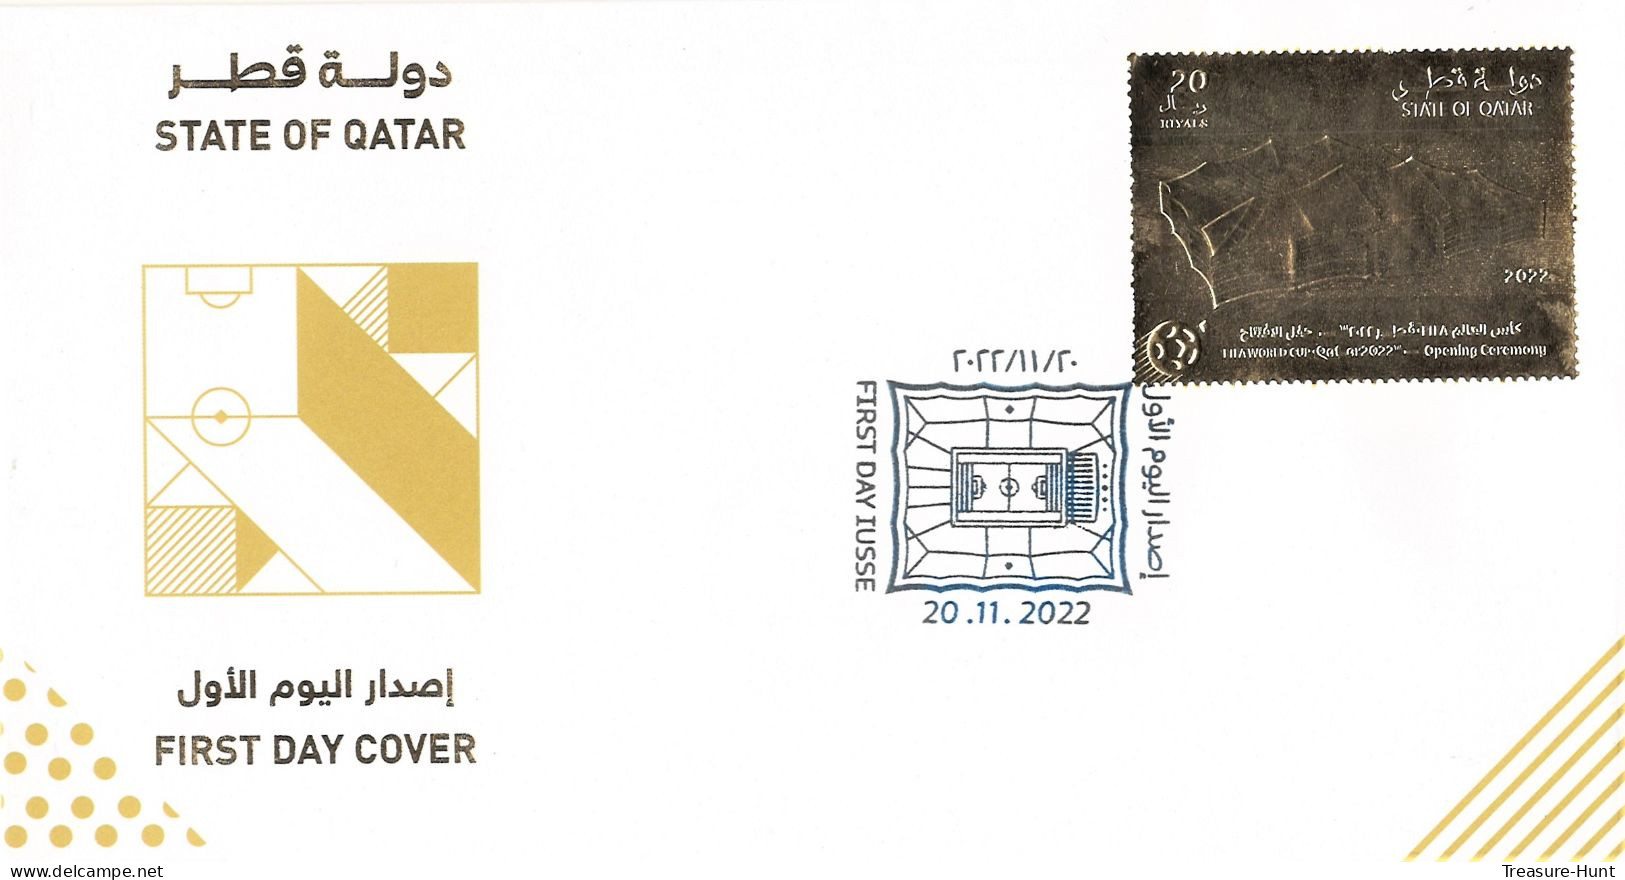 Complete Set of First Day Covers - QATAR 2022 FIFA World Cup Soccer Football Championship - 11 Stamps Sets, 15 FDC's